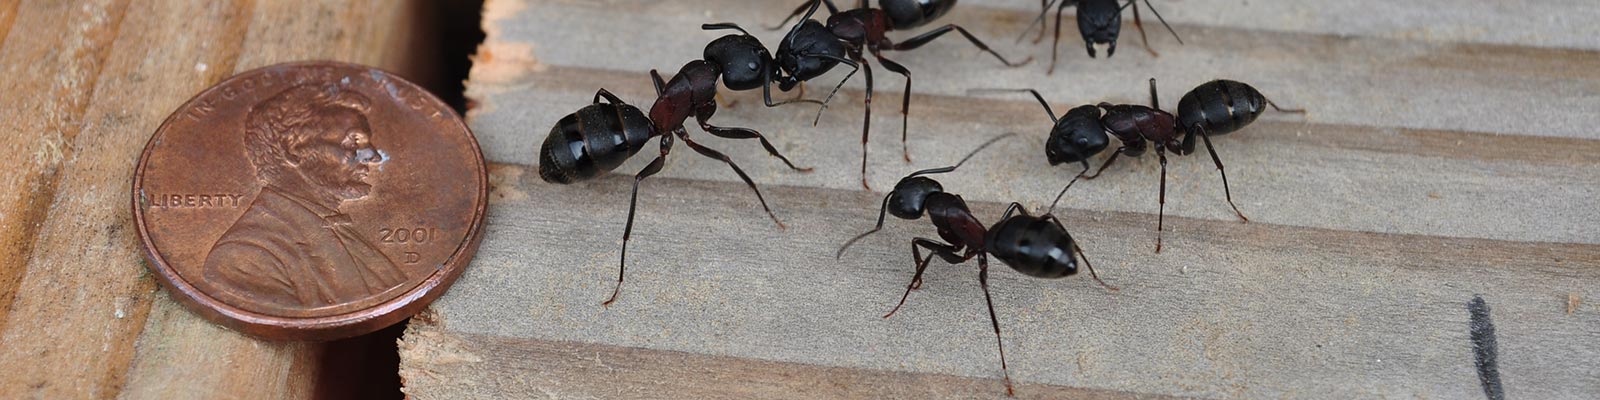 Carpenter Ants Being Exterminated From Home